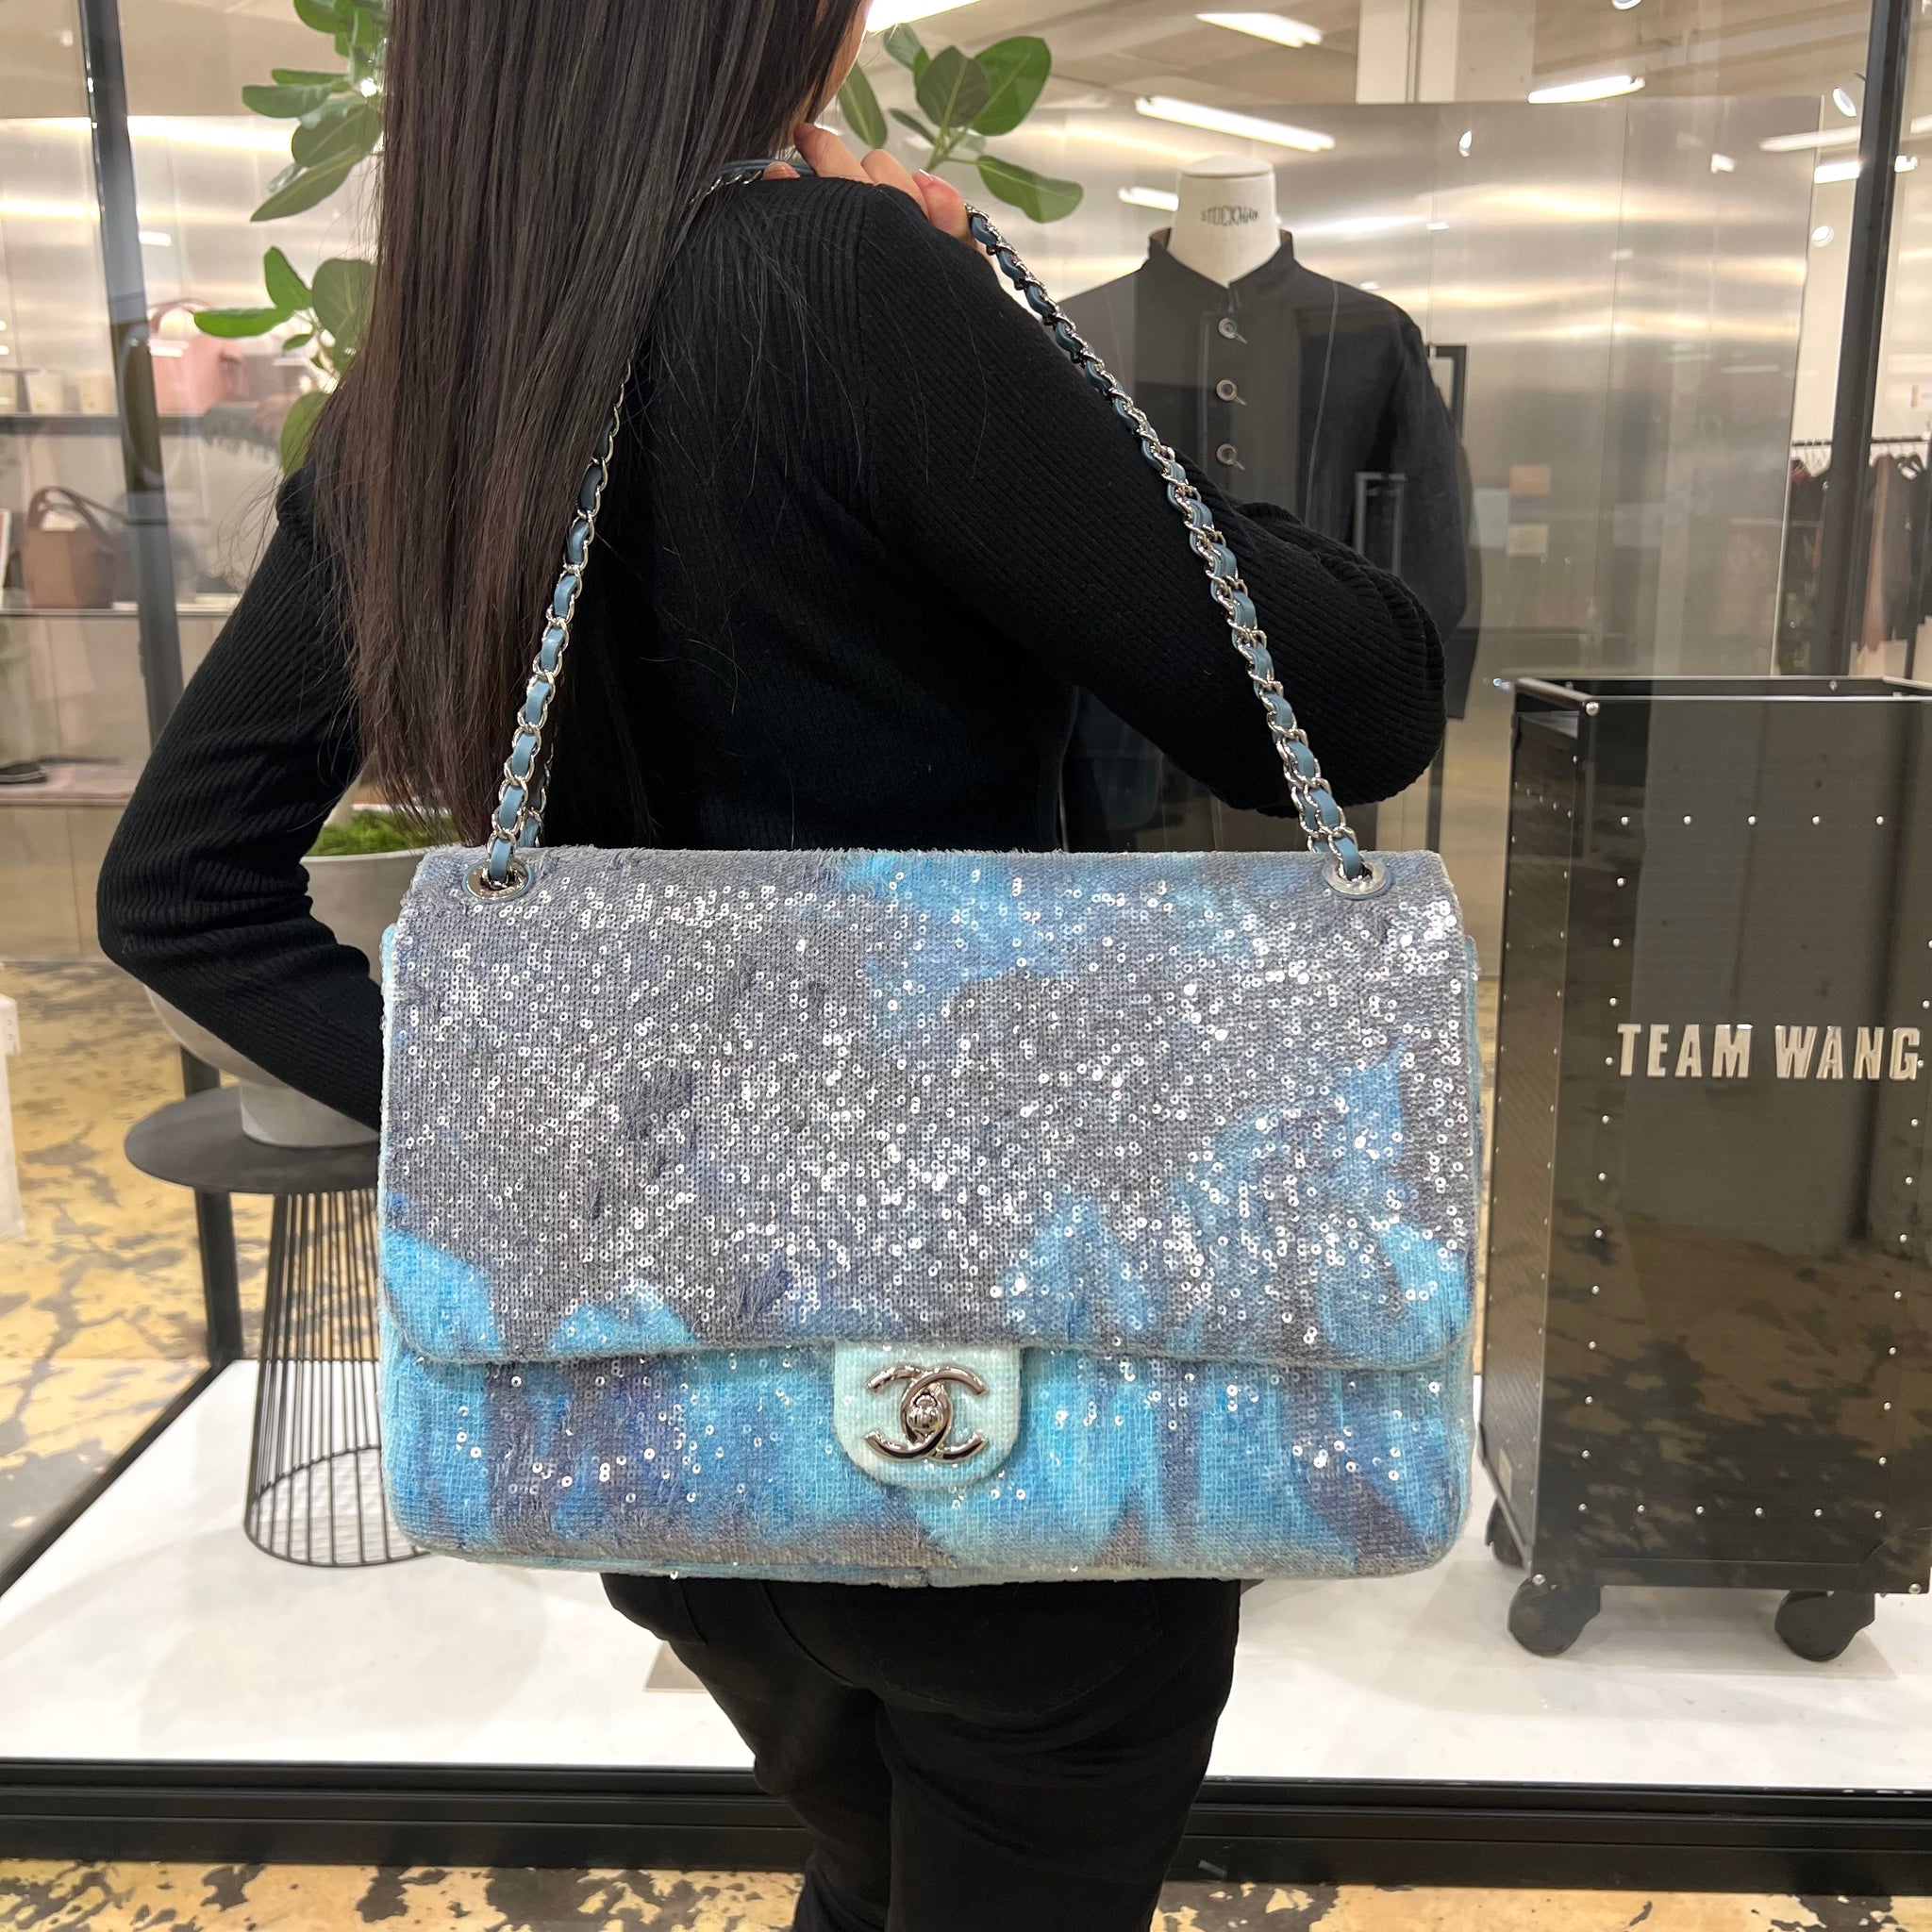 A RUNWAY BLUE WATERFALL SEQUIN JUMBO SINGLE FLAP BAG WITH SILVER HARDWARE,  CHANEL, SPRING/SUMMER 2018